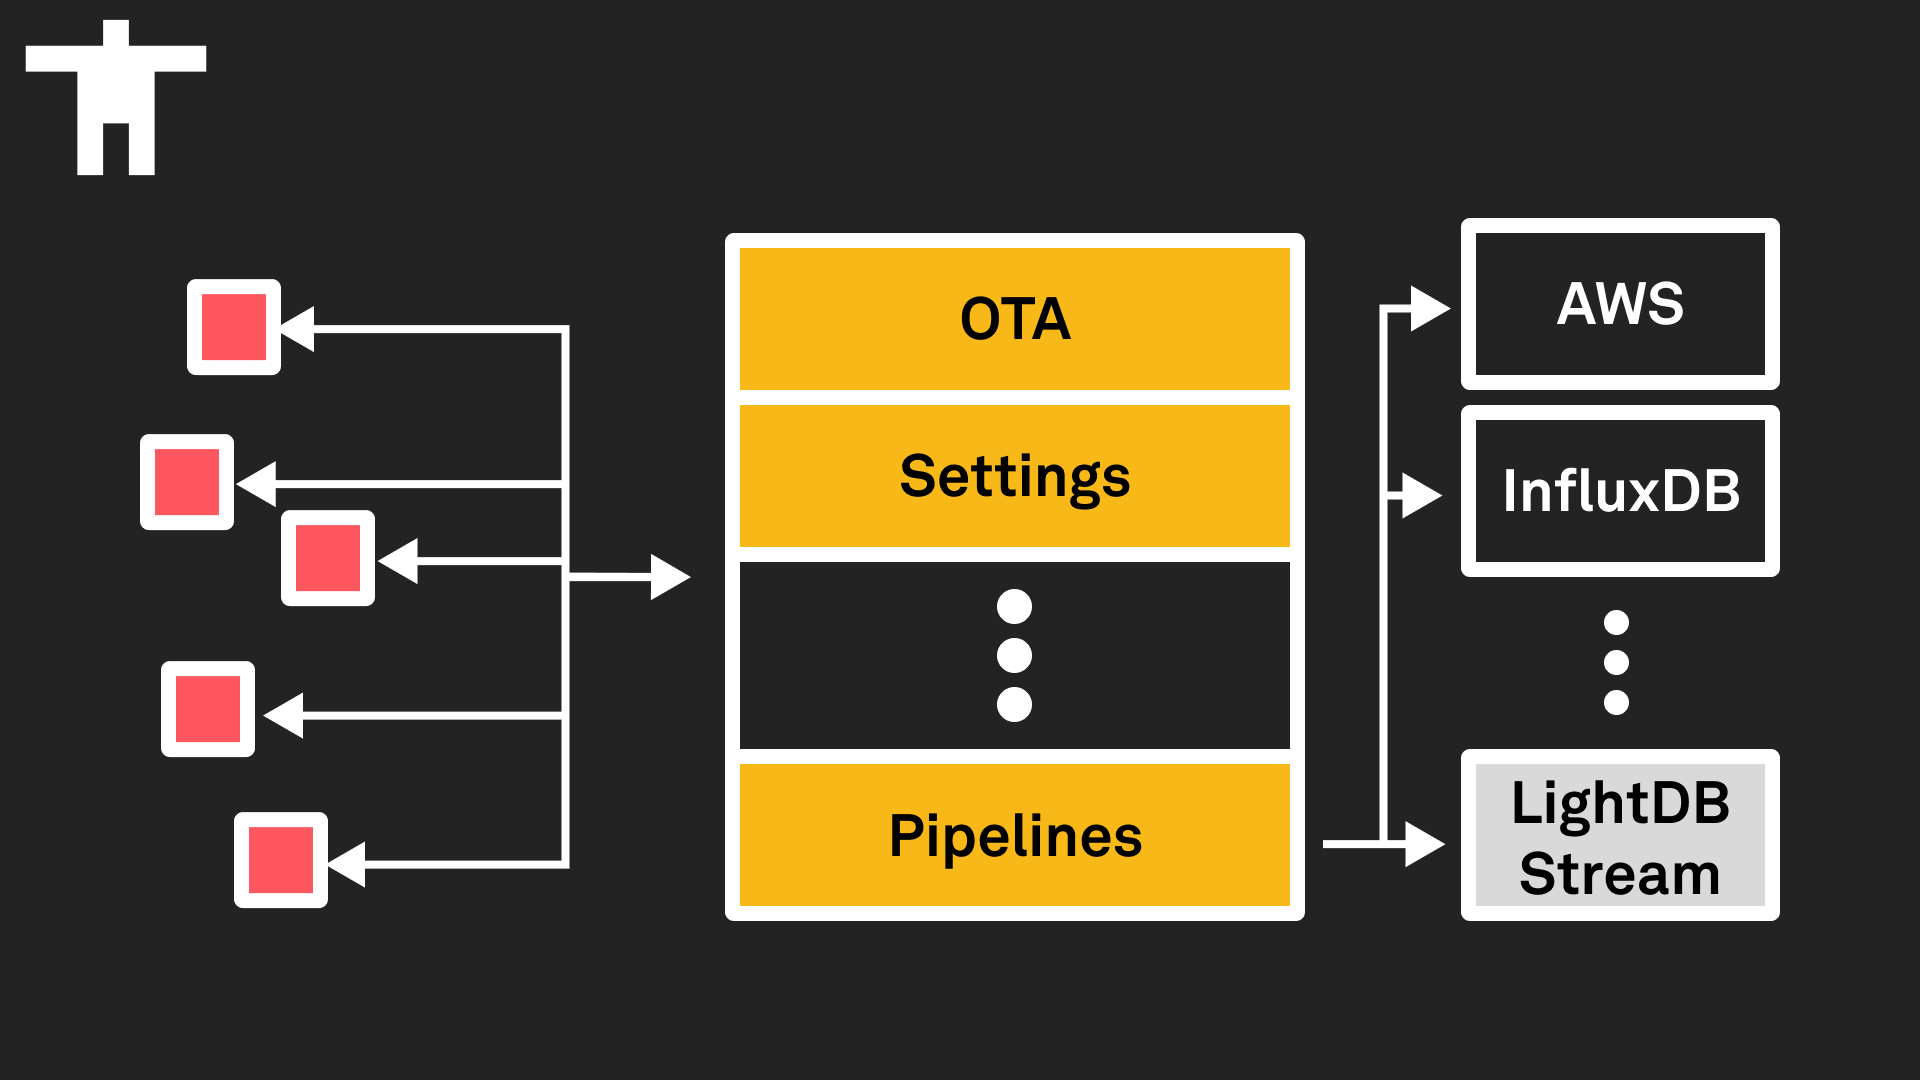 Diagram showing devices talking to Golioth services, but LightDB Stream is moved to be aligned with the external services and replaced by Pipelines.